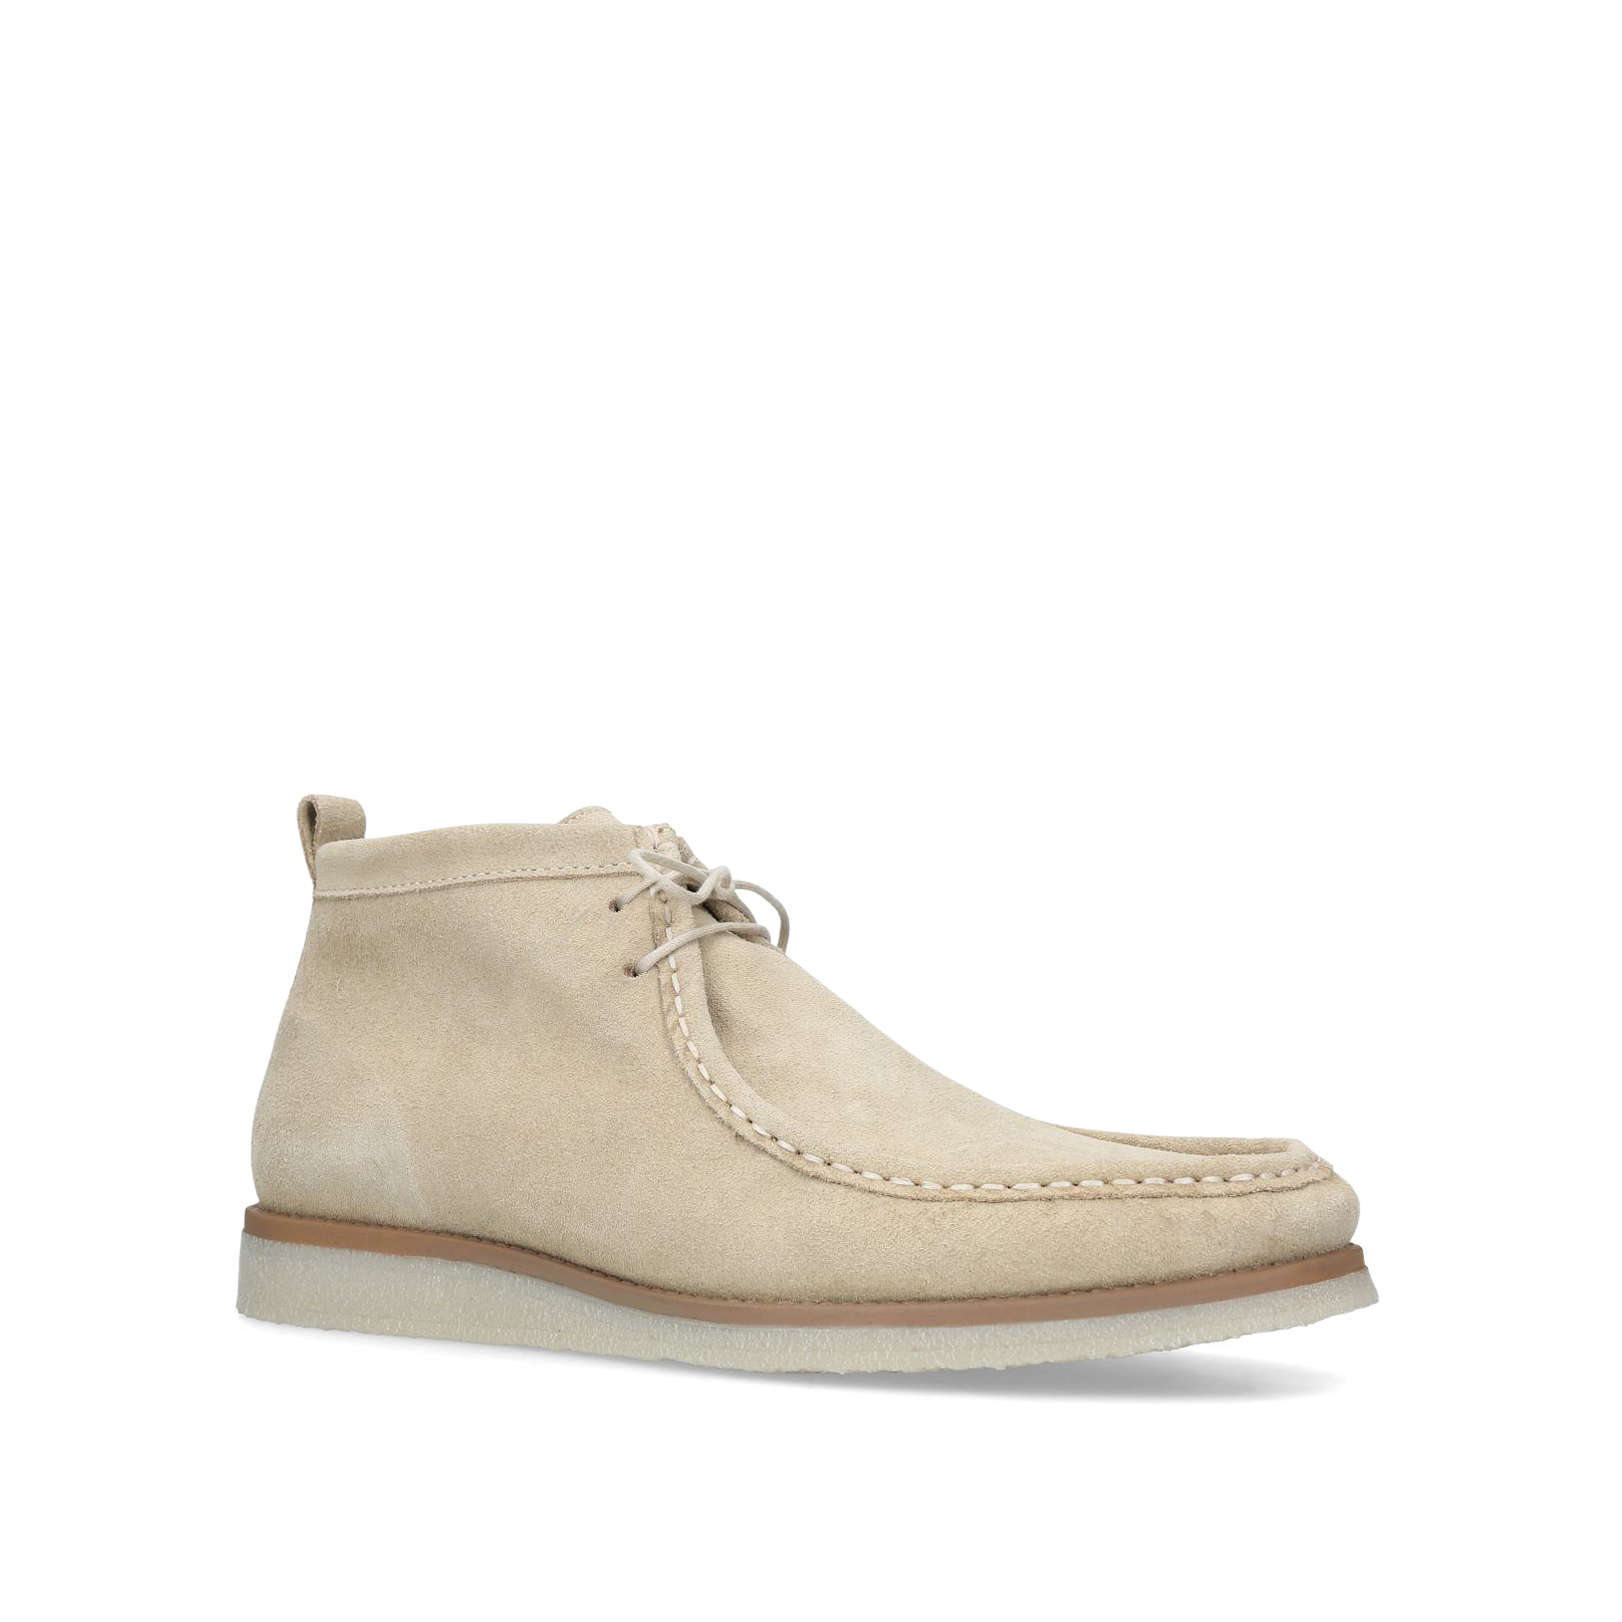 LACE UP MOCCASIN BOOT - RIVER ISLAND Boots